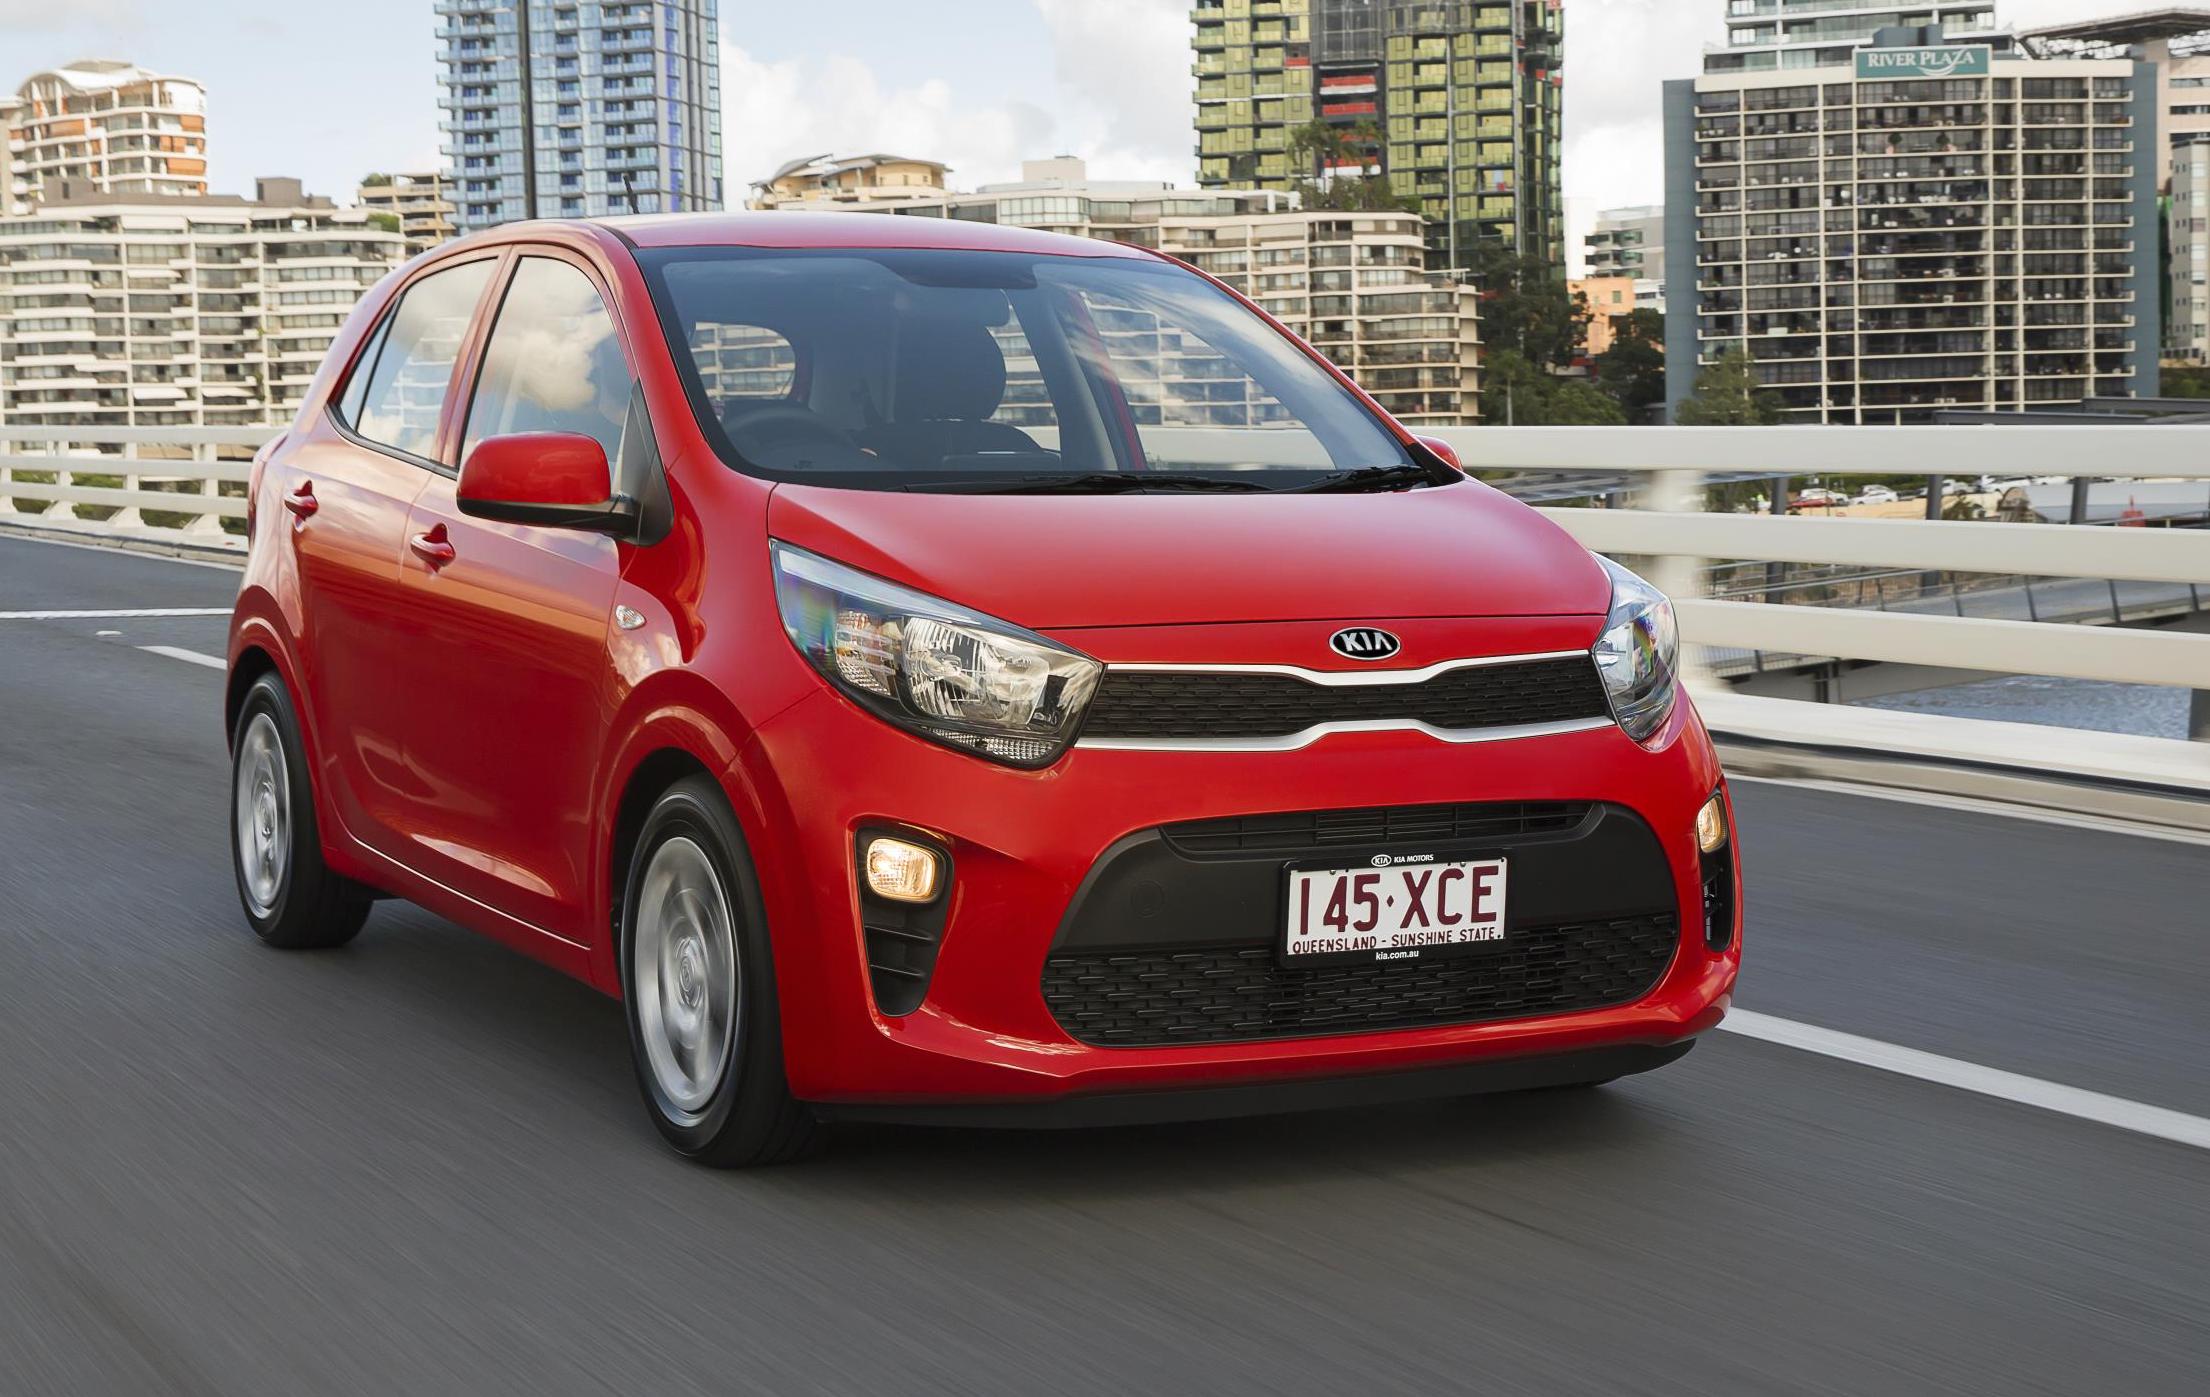 Kia Picanto EV on the cards, challenge to keep costs down – report